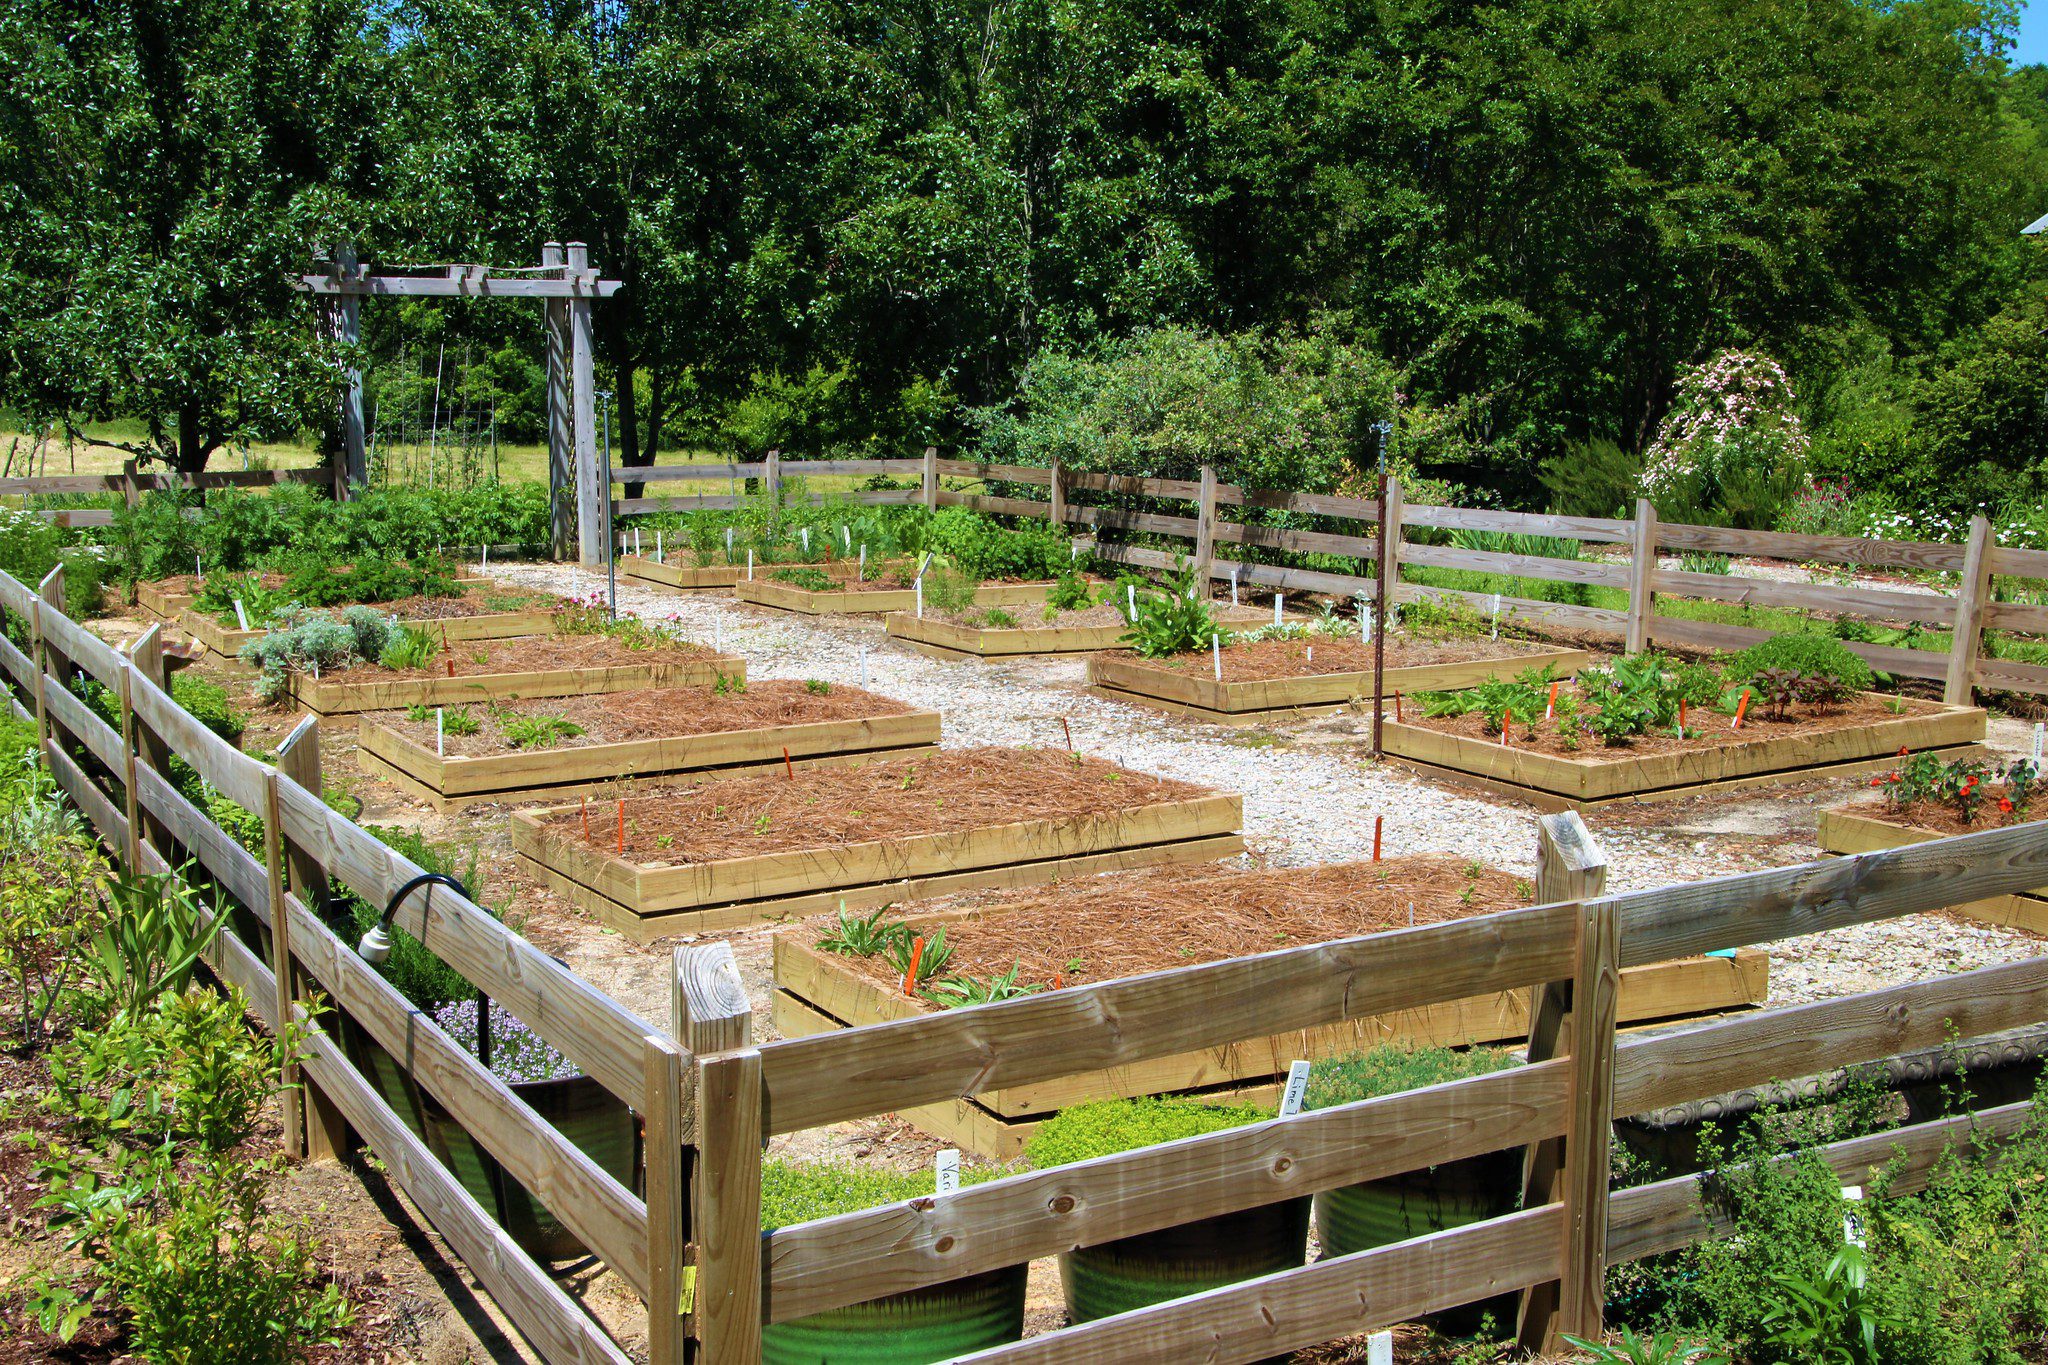 Raised beds surrounded by a wooden fence